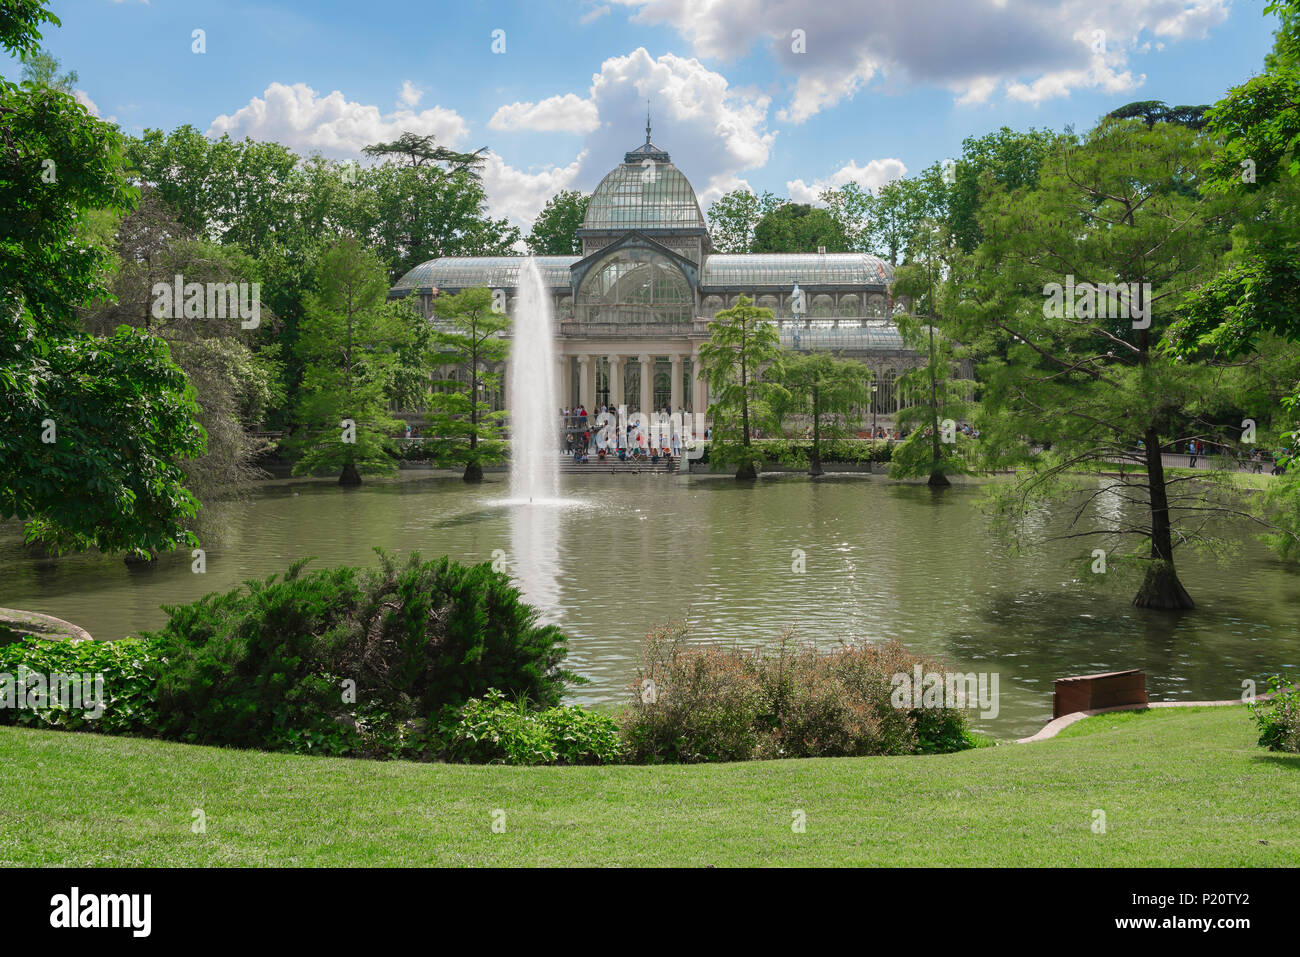 Madrid park Crystal Palace, view of the Palacio Cristal and lake in the centre of the Parque del Retiro in Madrid, Spain. Stock Photo